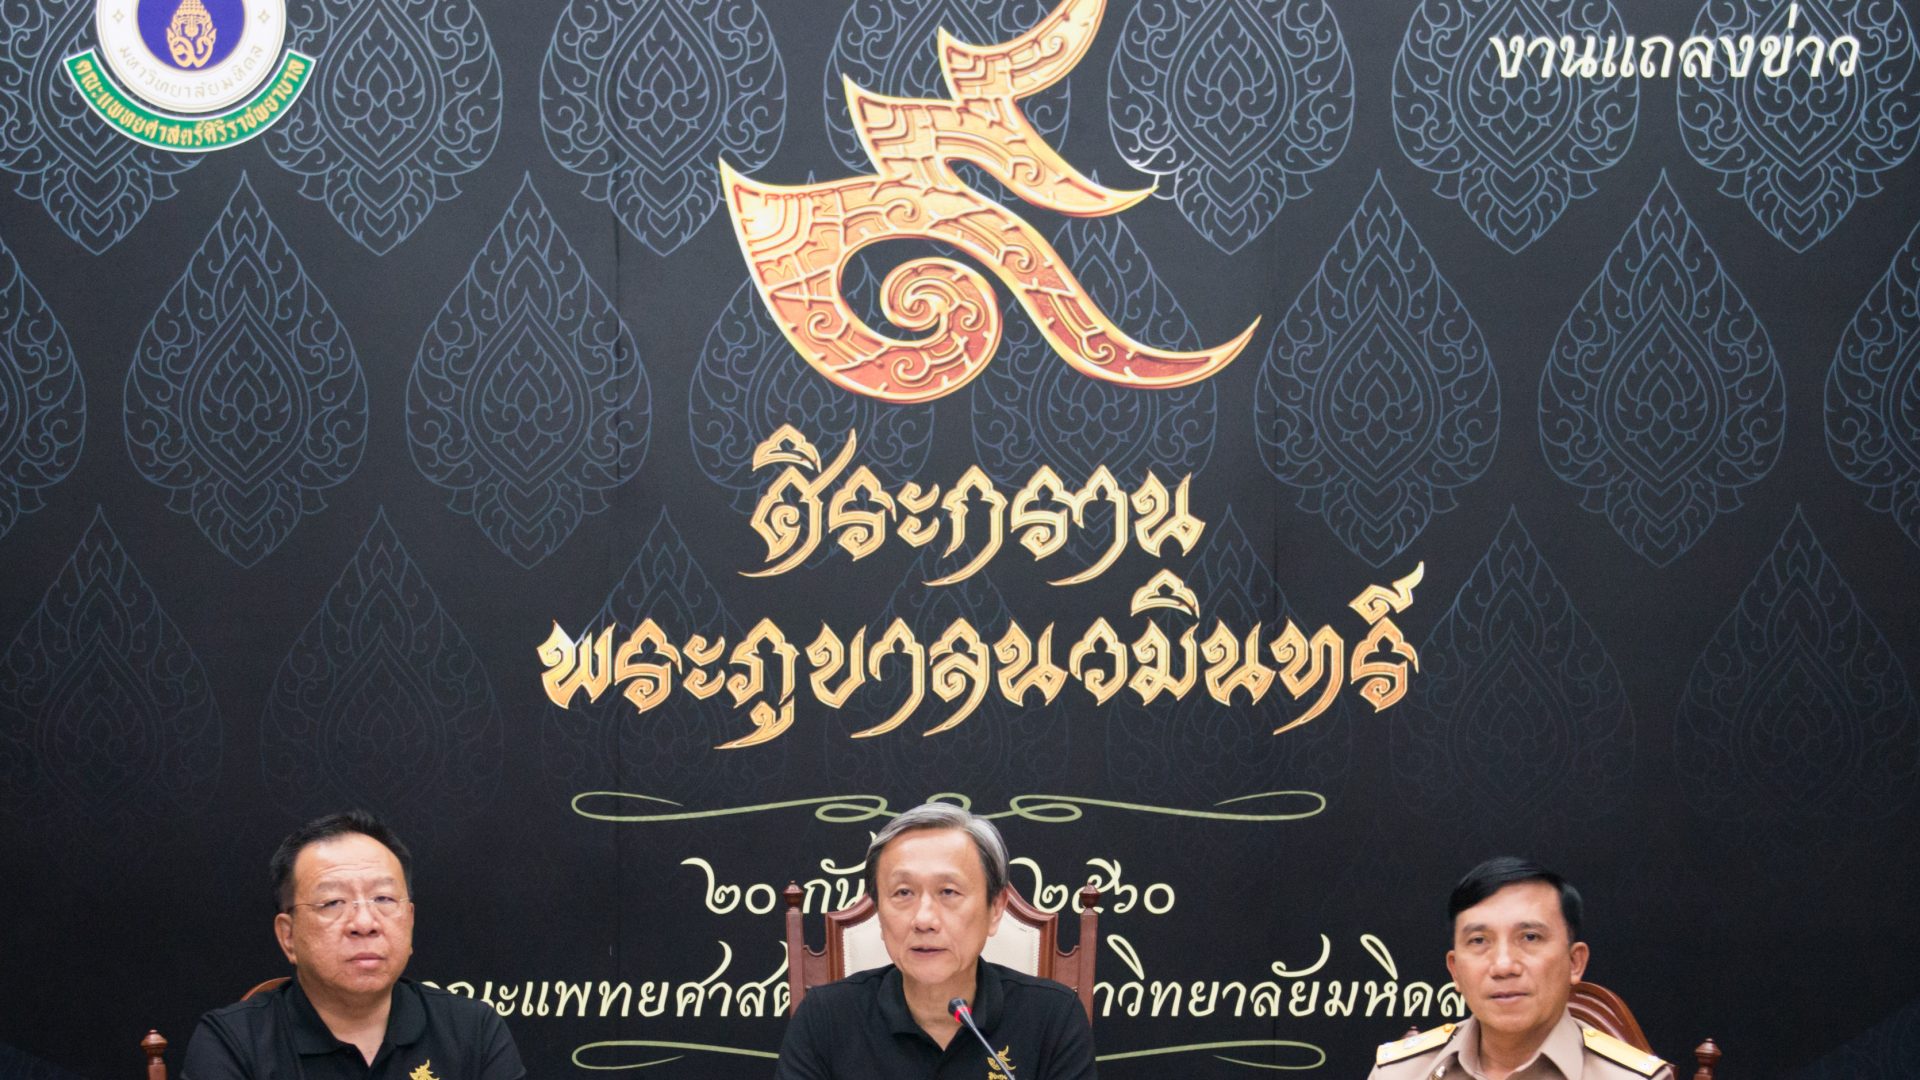 Siriraj held Special Exhibition “In Remembrance of His Majesty the Late King Bhumibol Adulyadej”